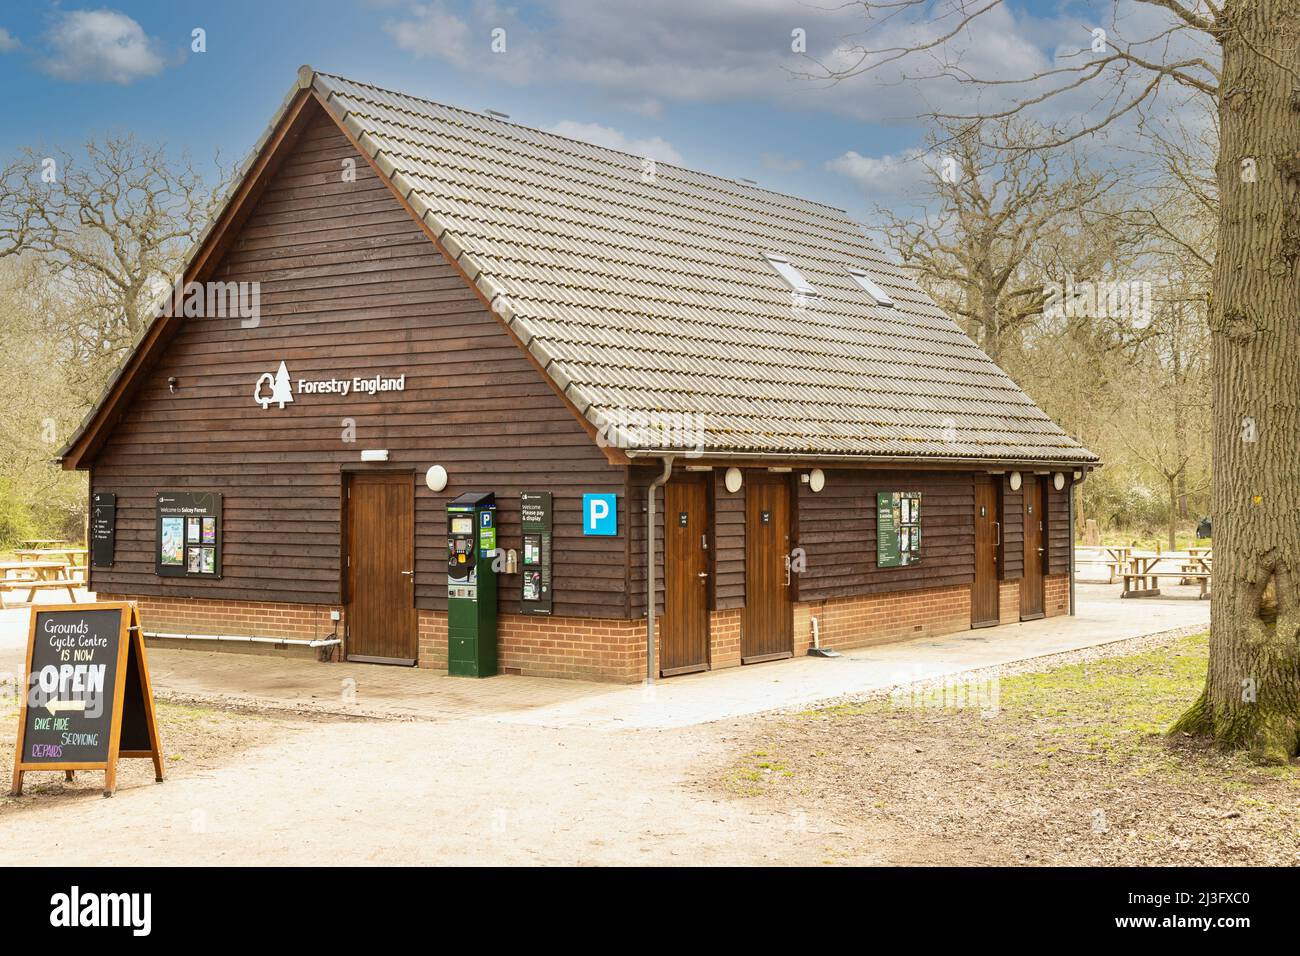 A public toilets building in a country park Stock Photo